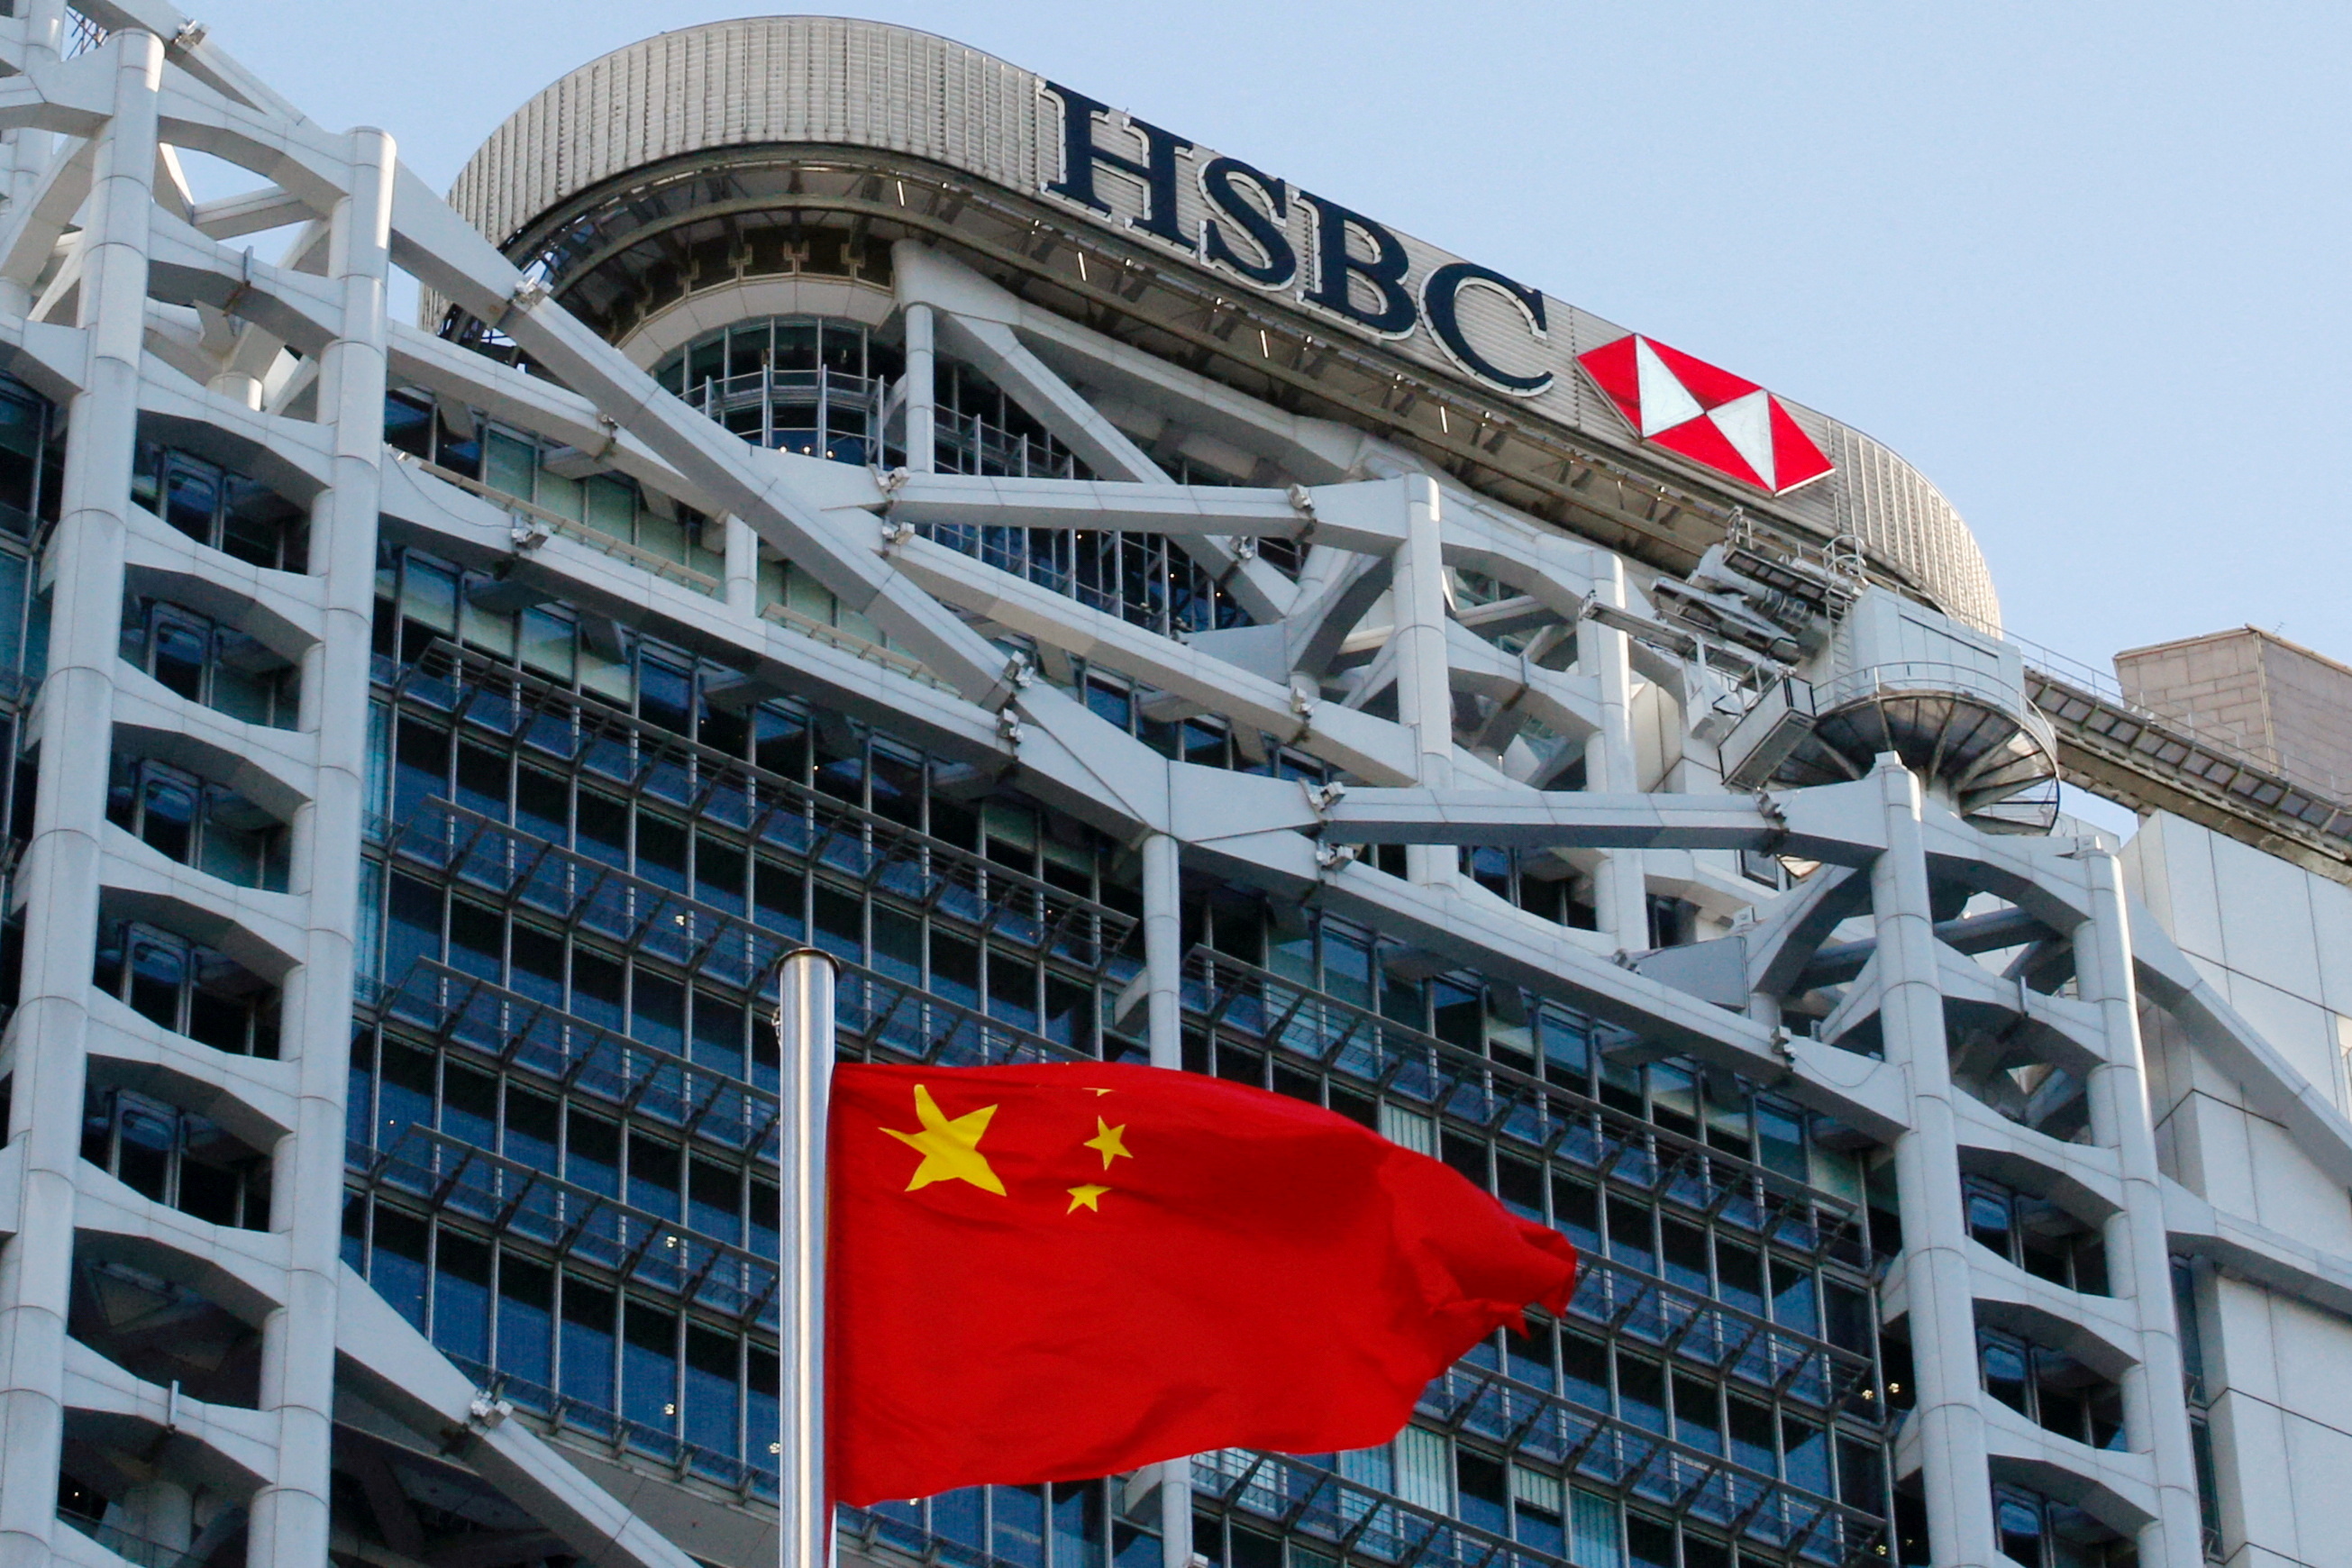 A Chinese national flag flies in front of HSBC headquarters in Hong Kong